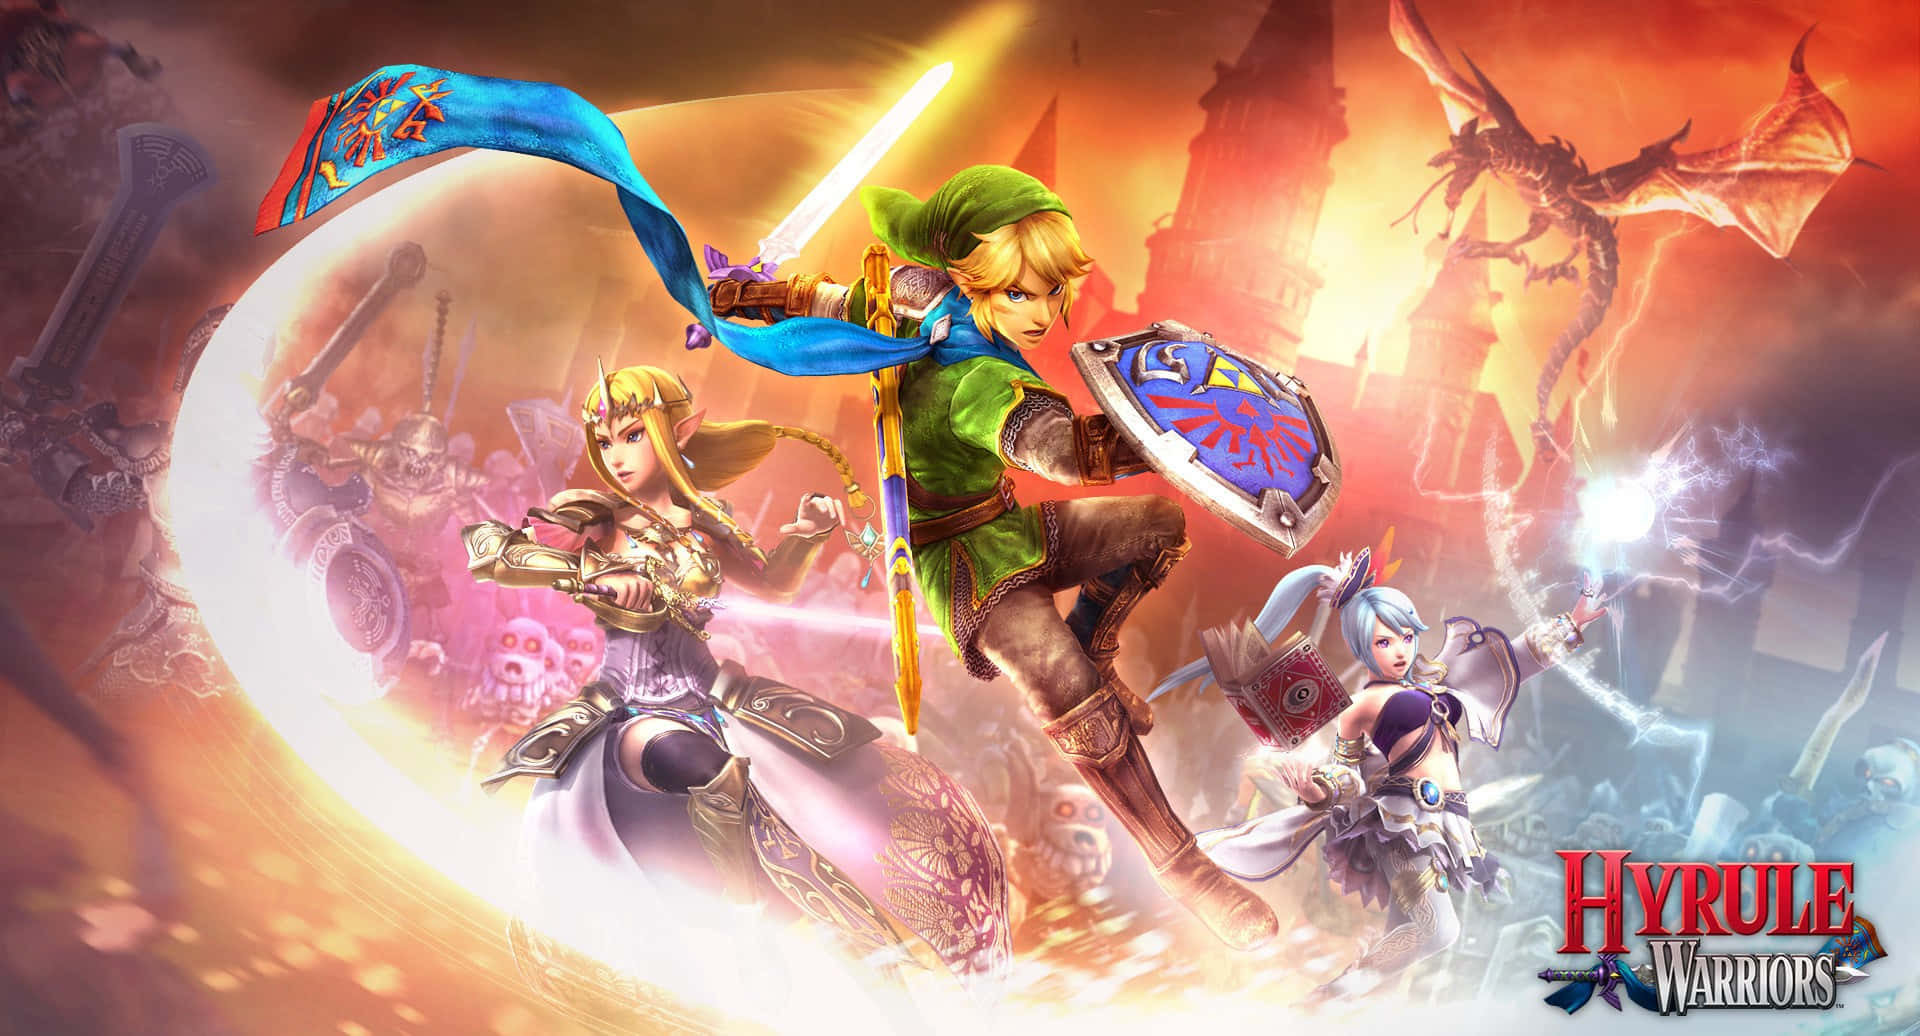 Journey through the magical land of Hyrule from The Legend of Zelda Wallpaper